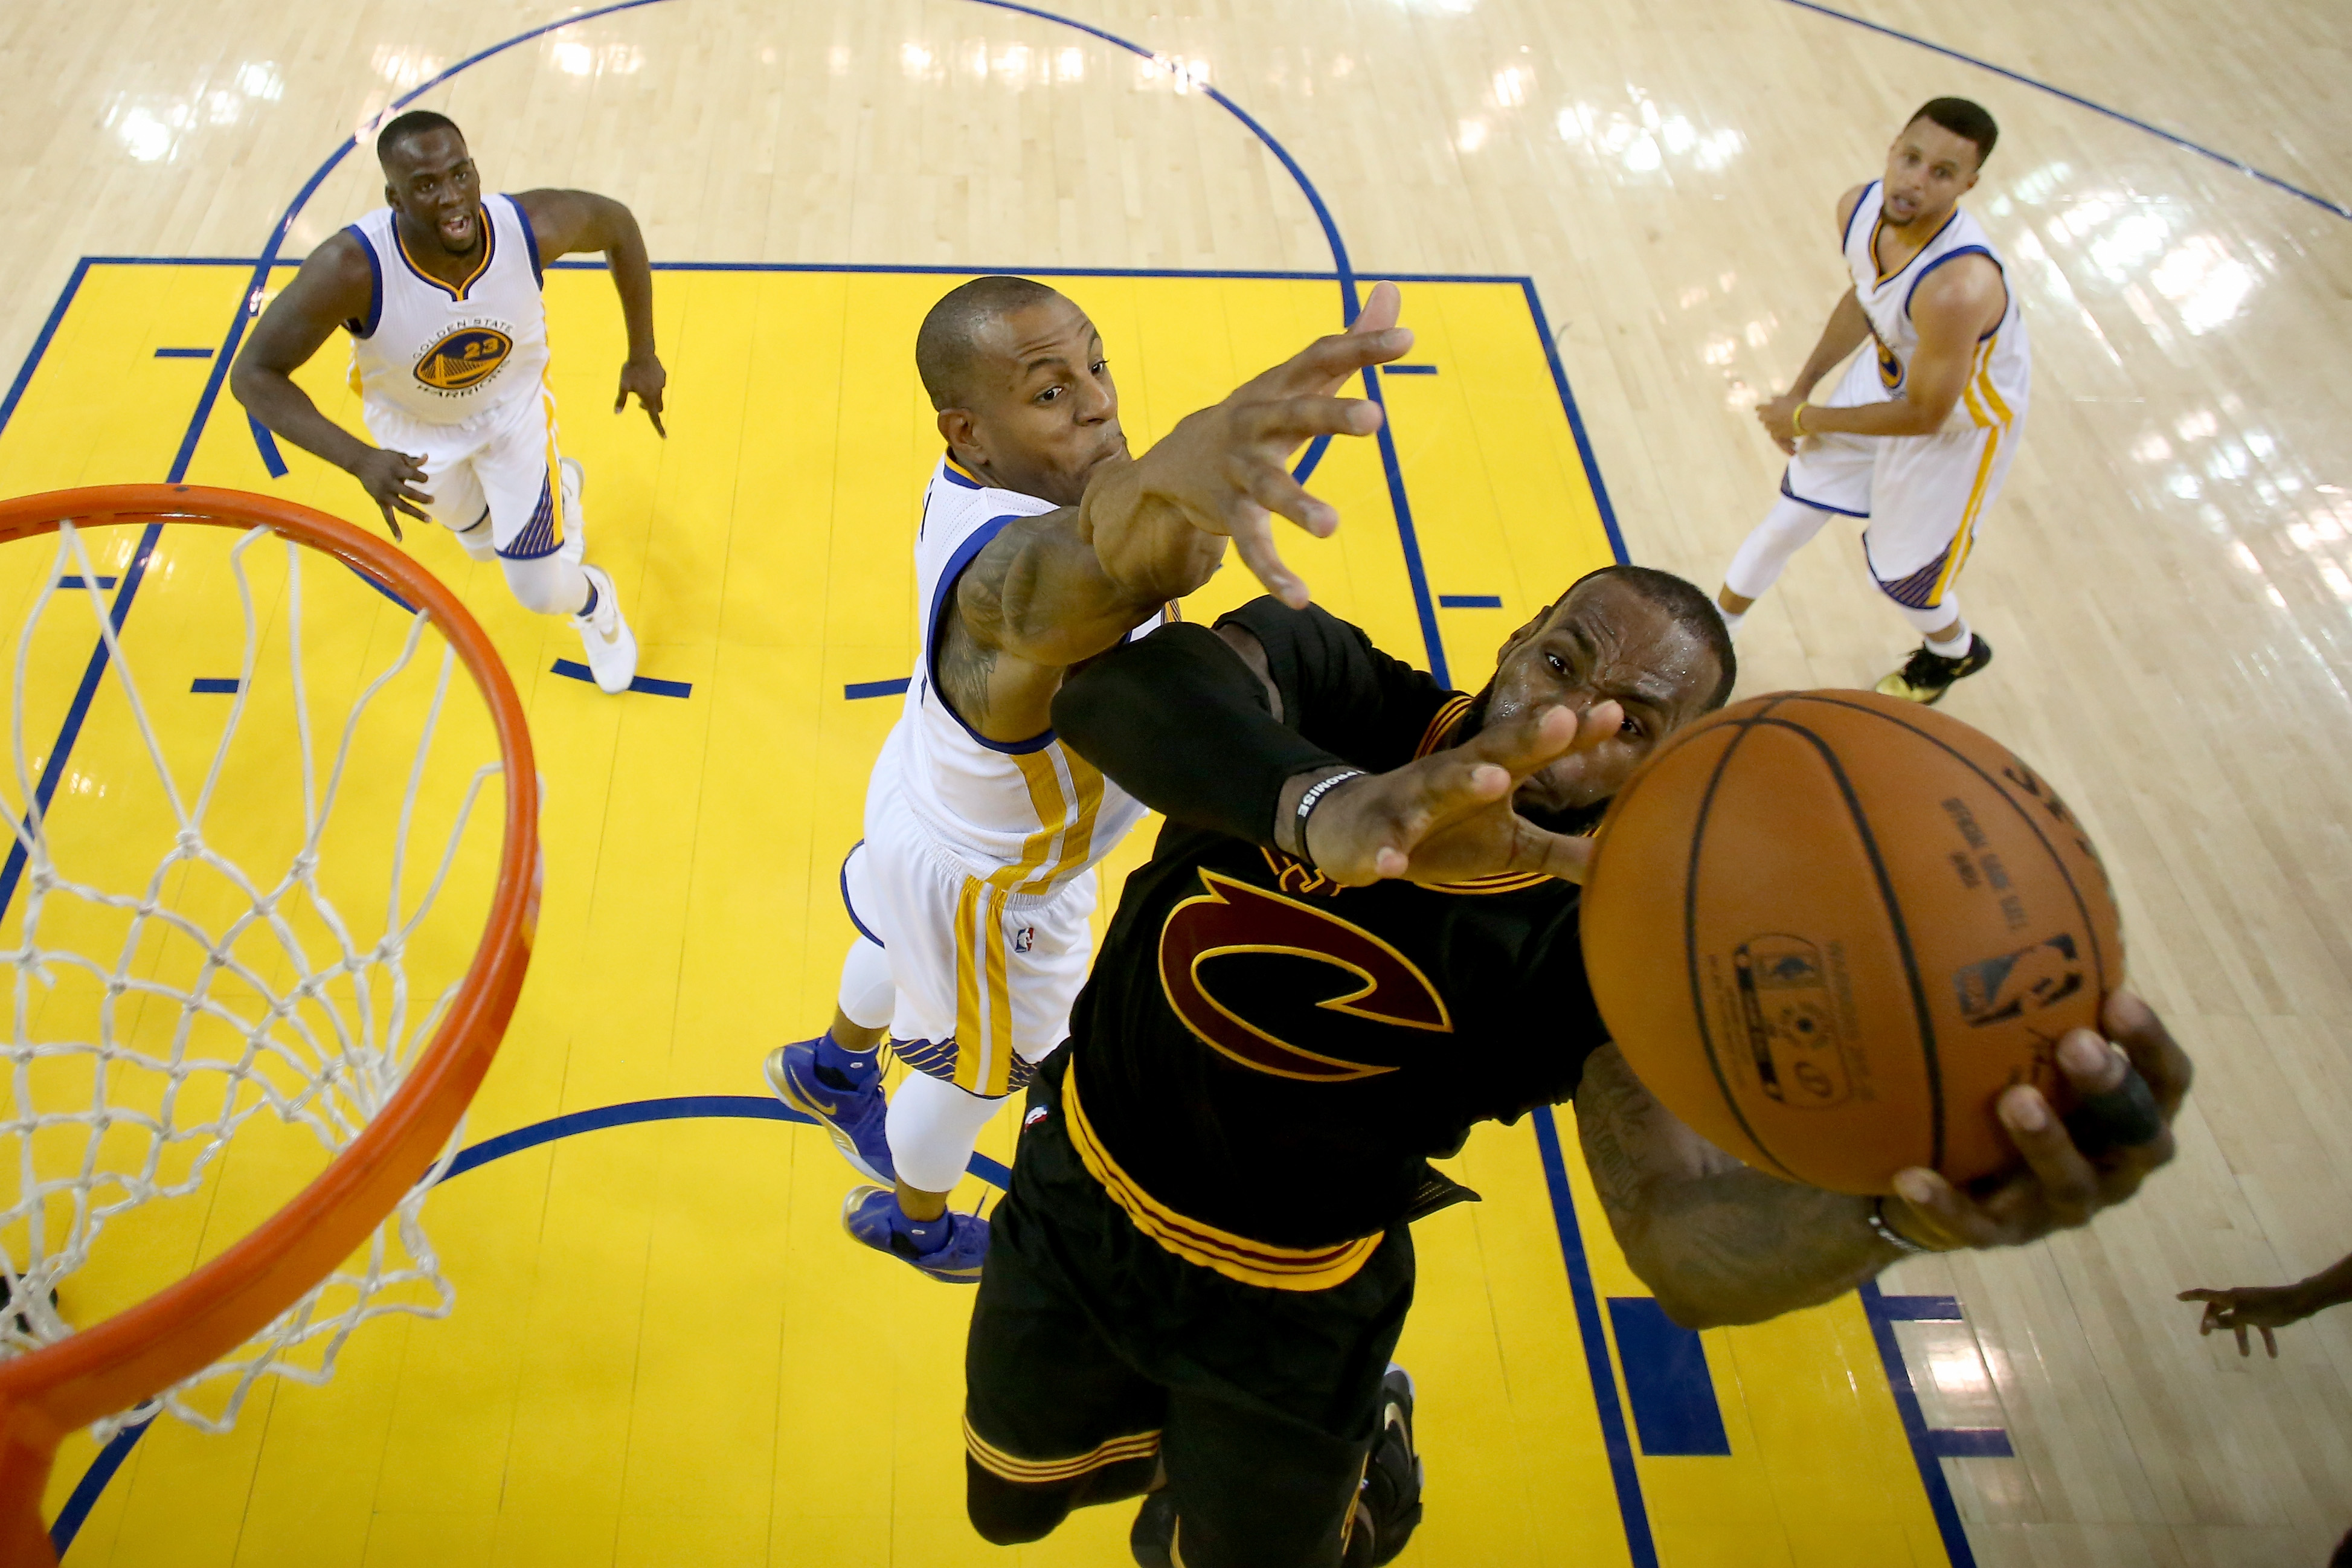 ABC to replay Game 7 of the 2016 NBA Finals on Easter Sunday